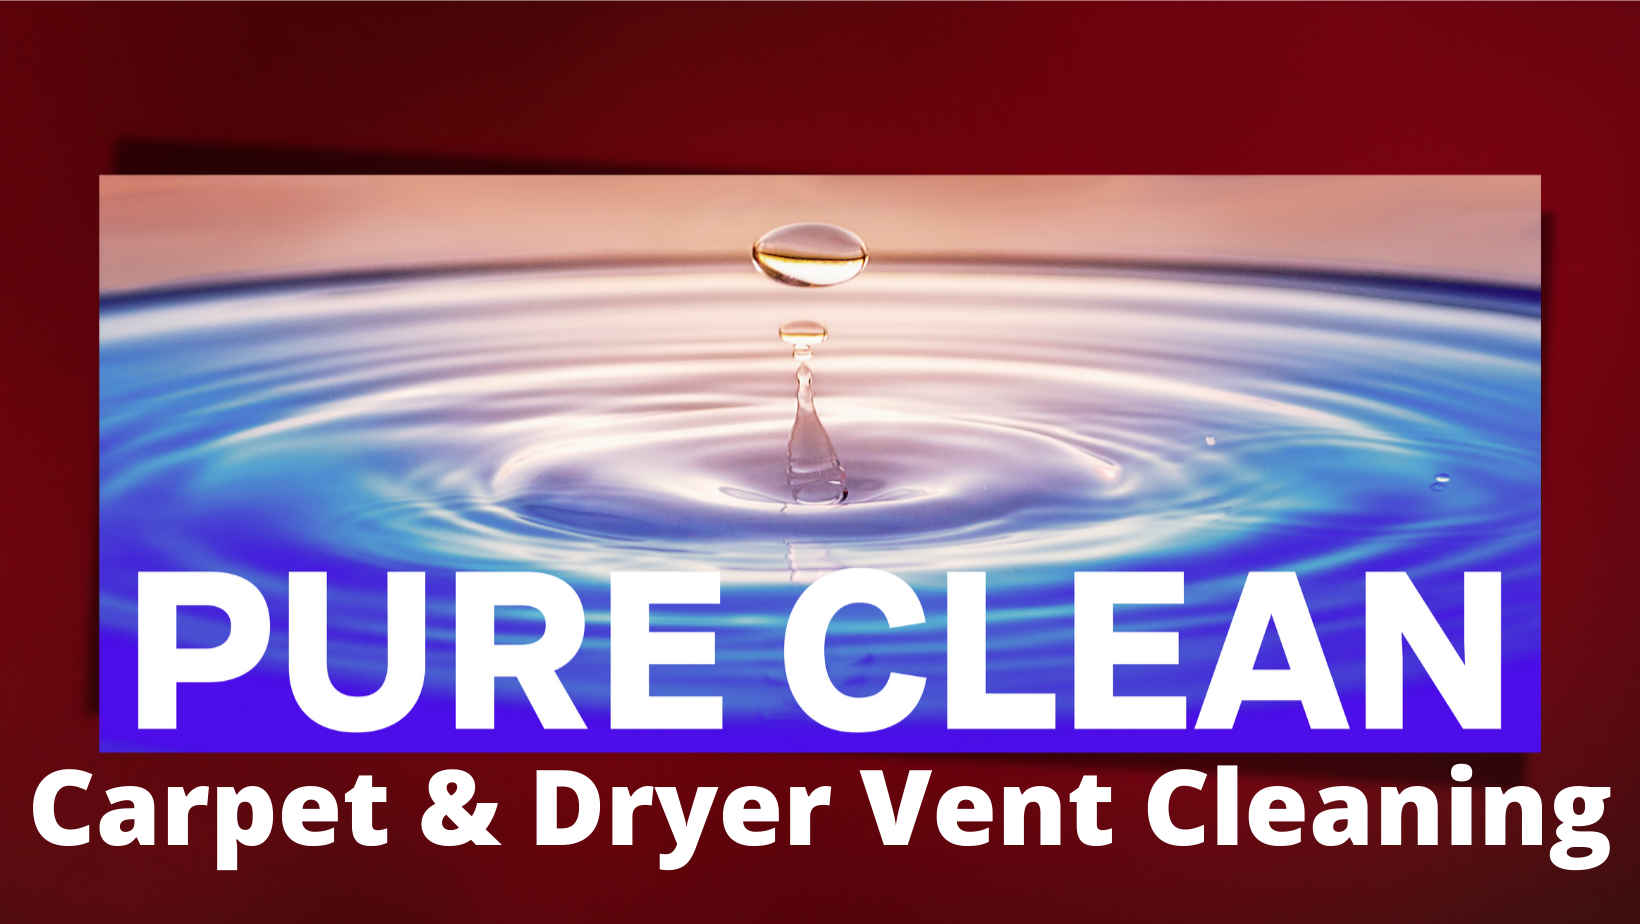 Carpet Dryer Vent Cleaning